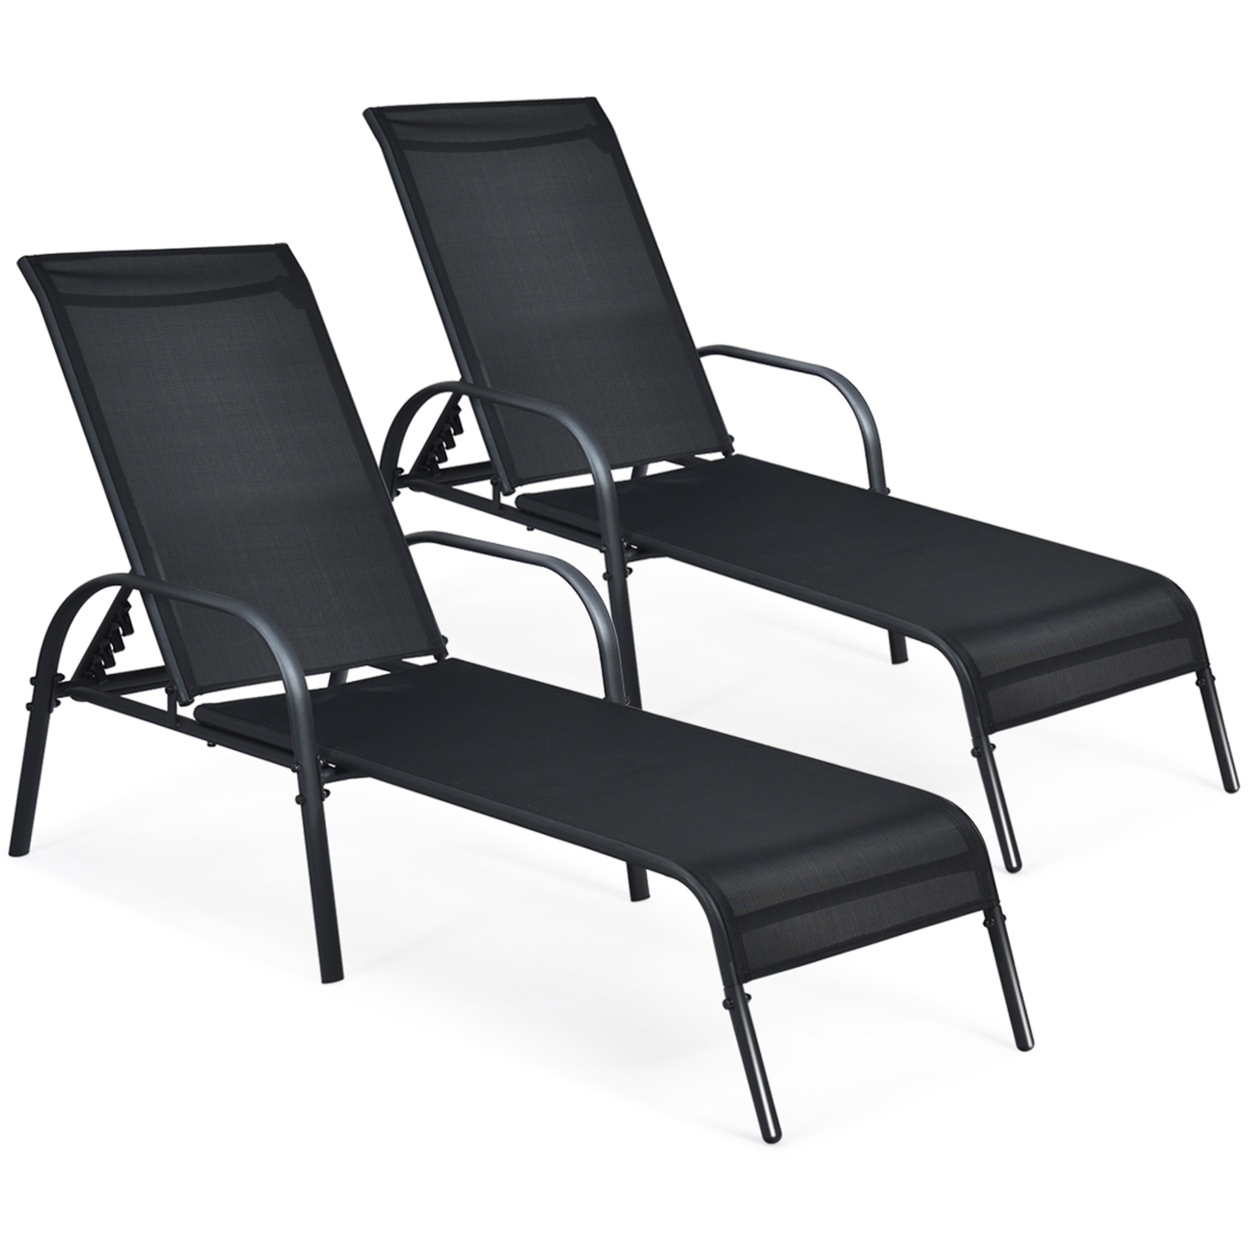 2PCS Adjustable Chaise Lounge Chair Recliner Patio Yard Outdoor W/ Armrest Black